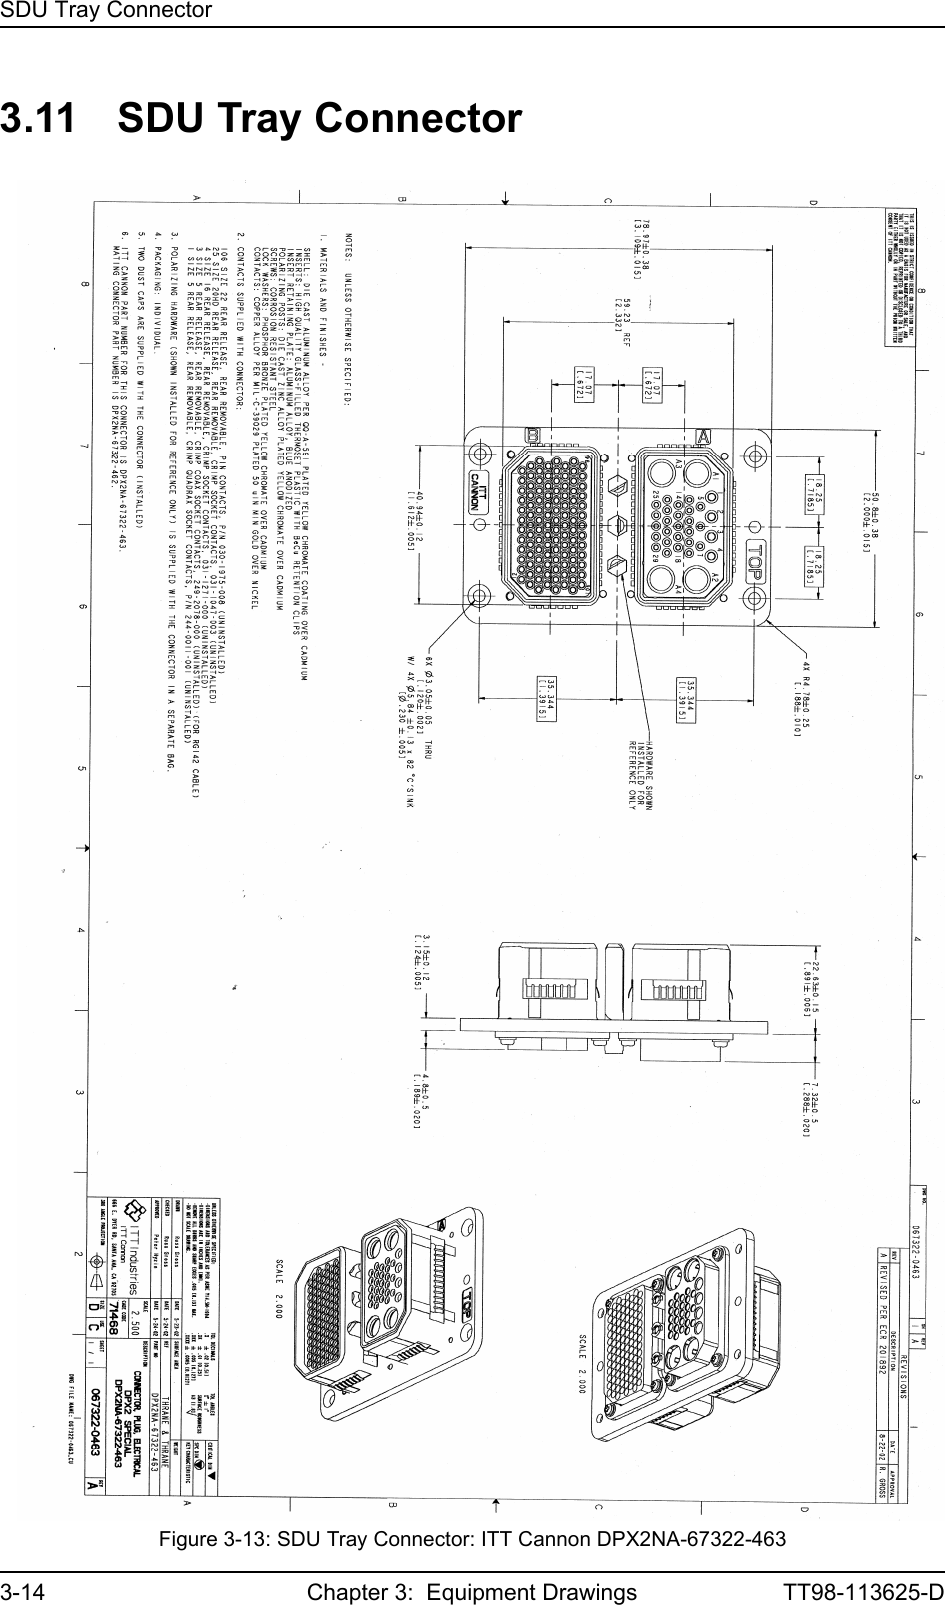 SDU Tray Connector3-14 Chapter 3:  Equipment Drawings TT98-113625-D3.11 SDU Tray ConnectorFigure 3-13: SDU Tray Connector: ITT Cannon DPX2NA-67322-463